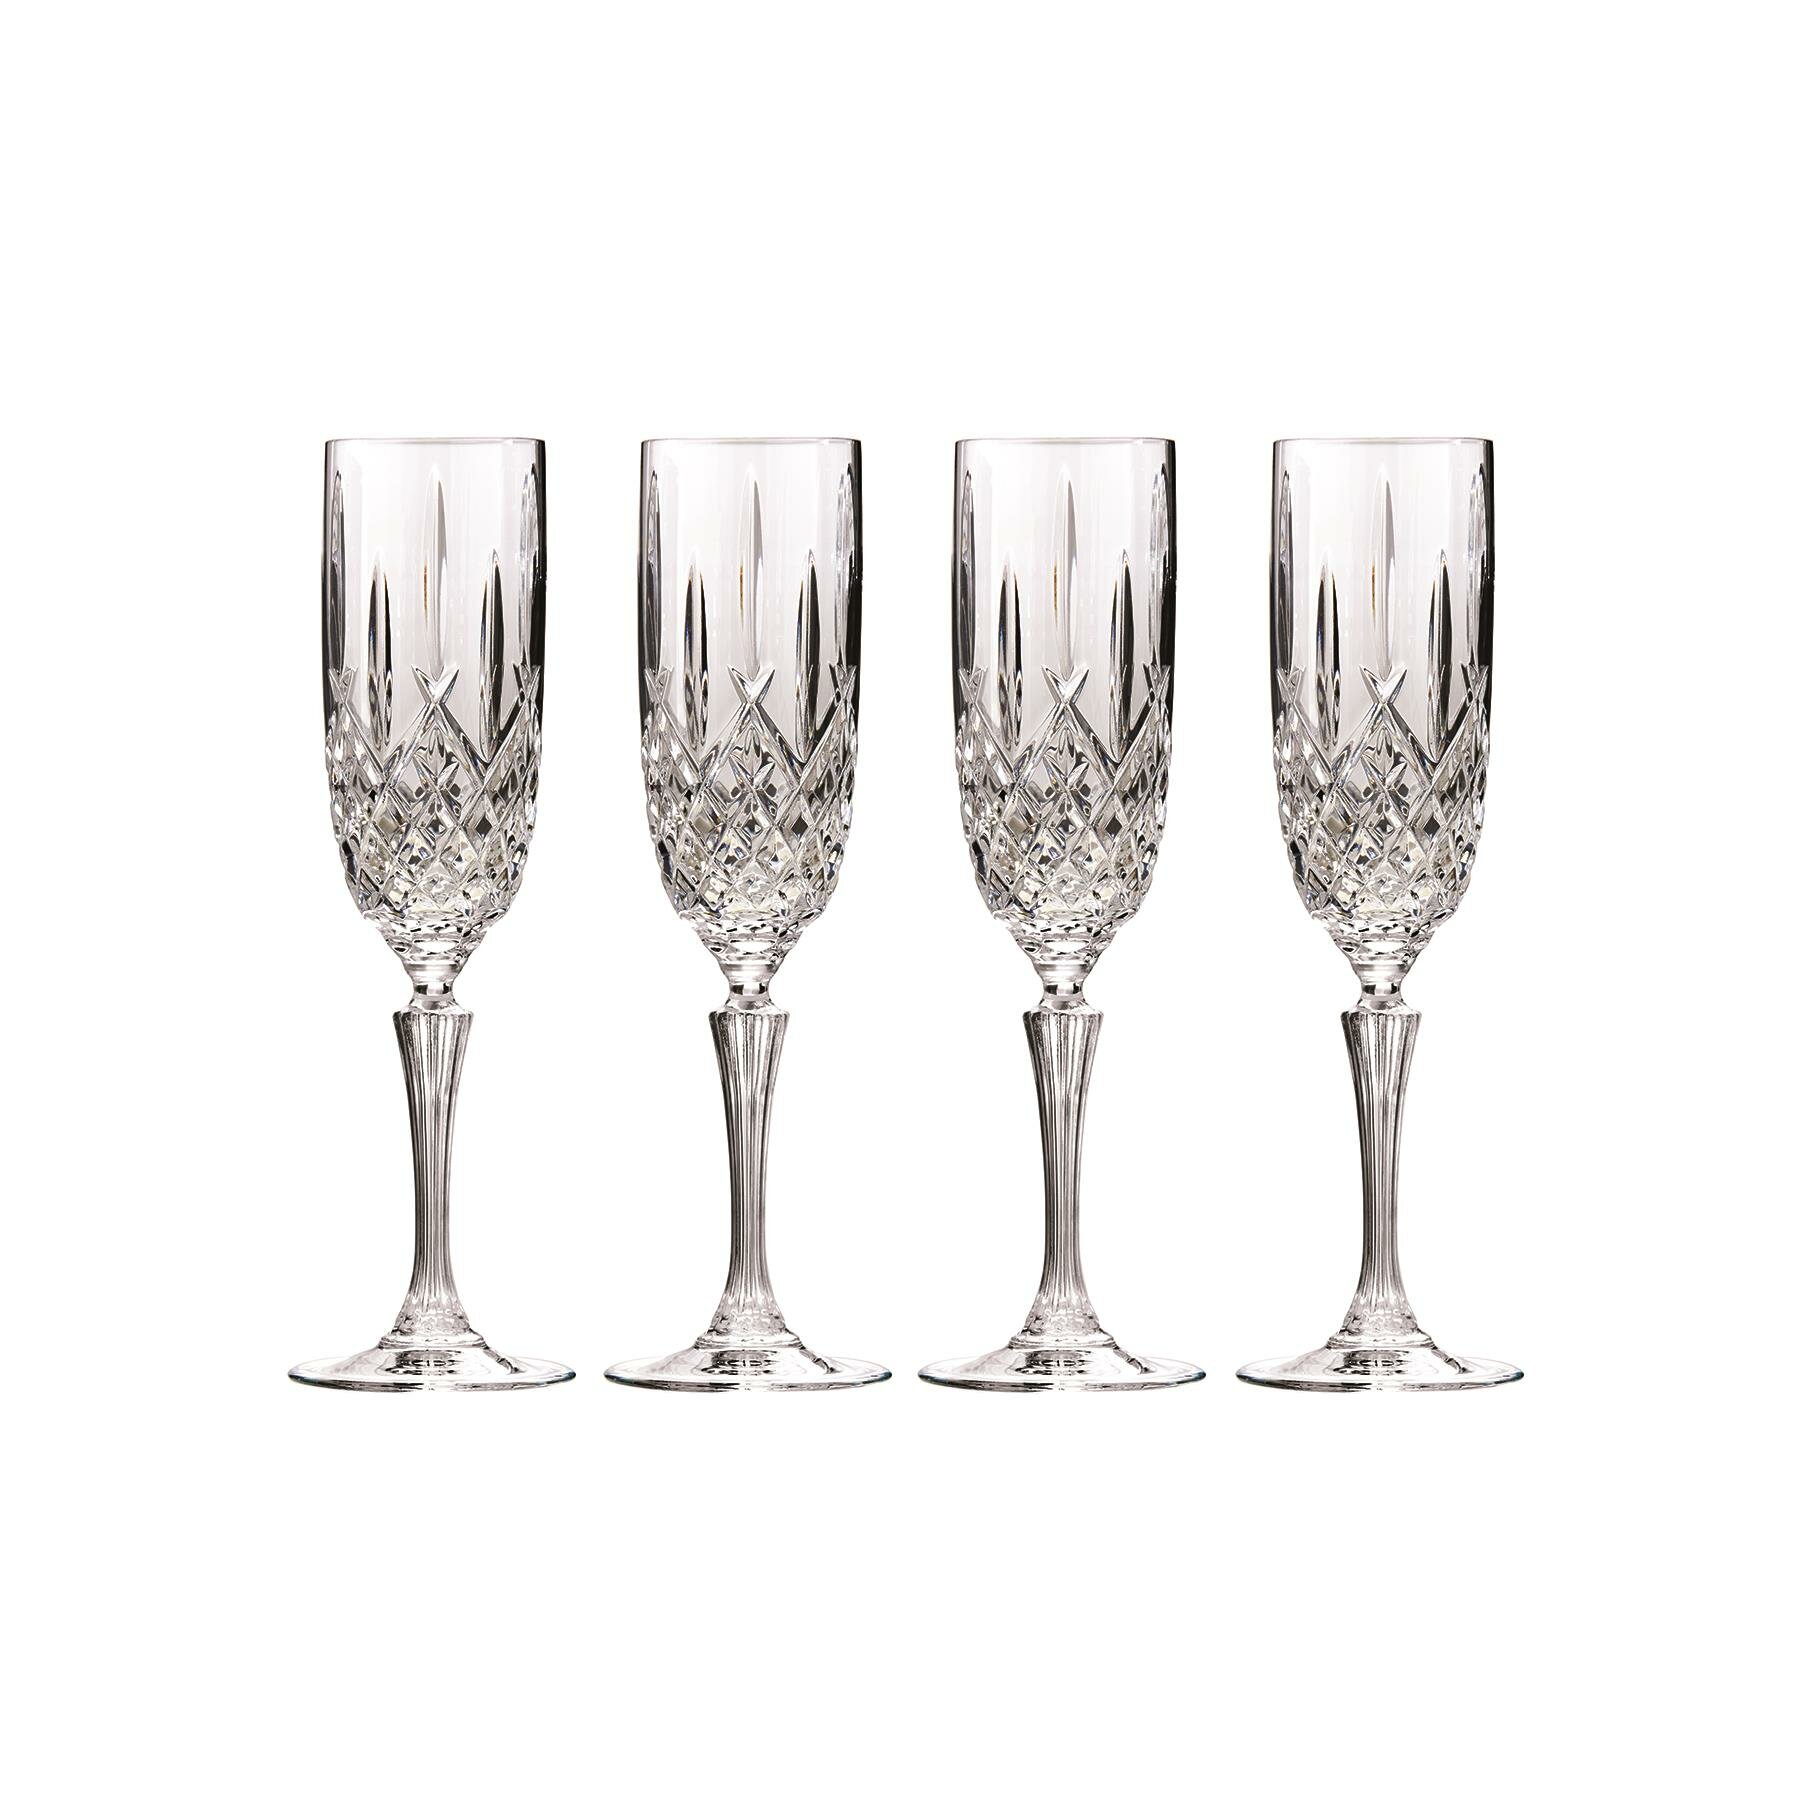 Waterford True Love Set of 2 Lead Crystal Champagne Flutes